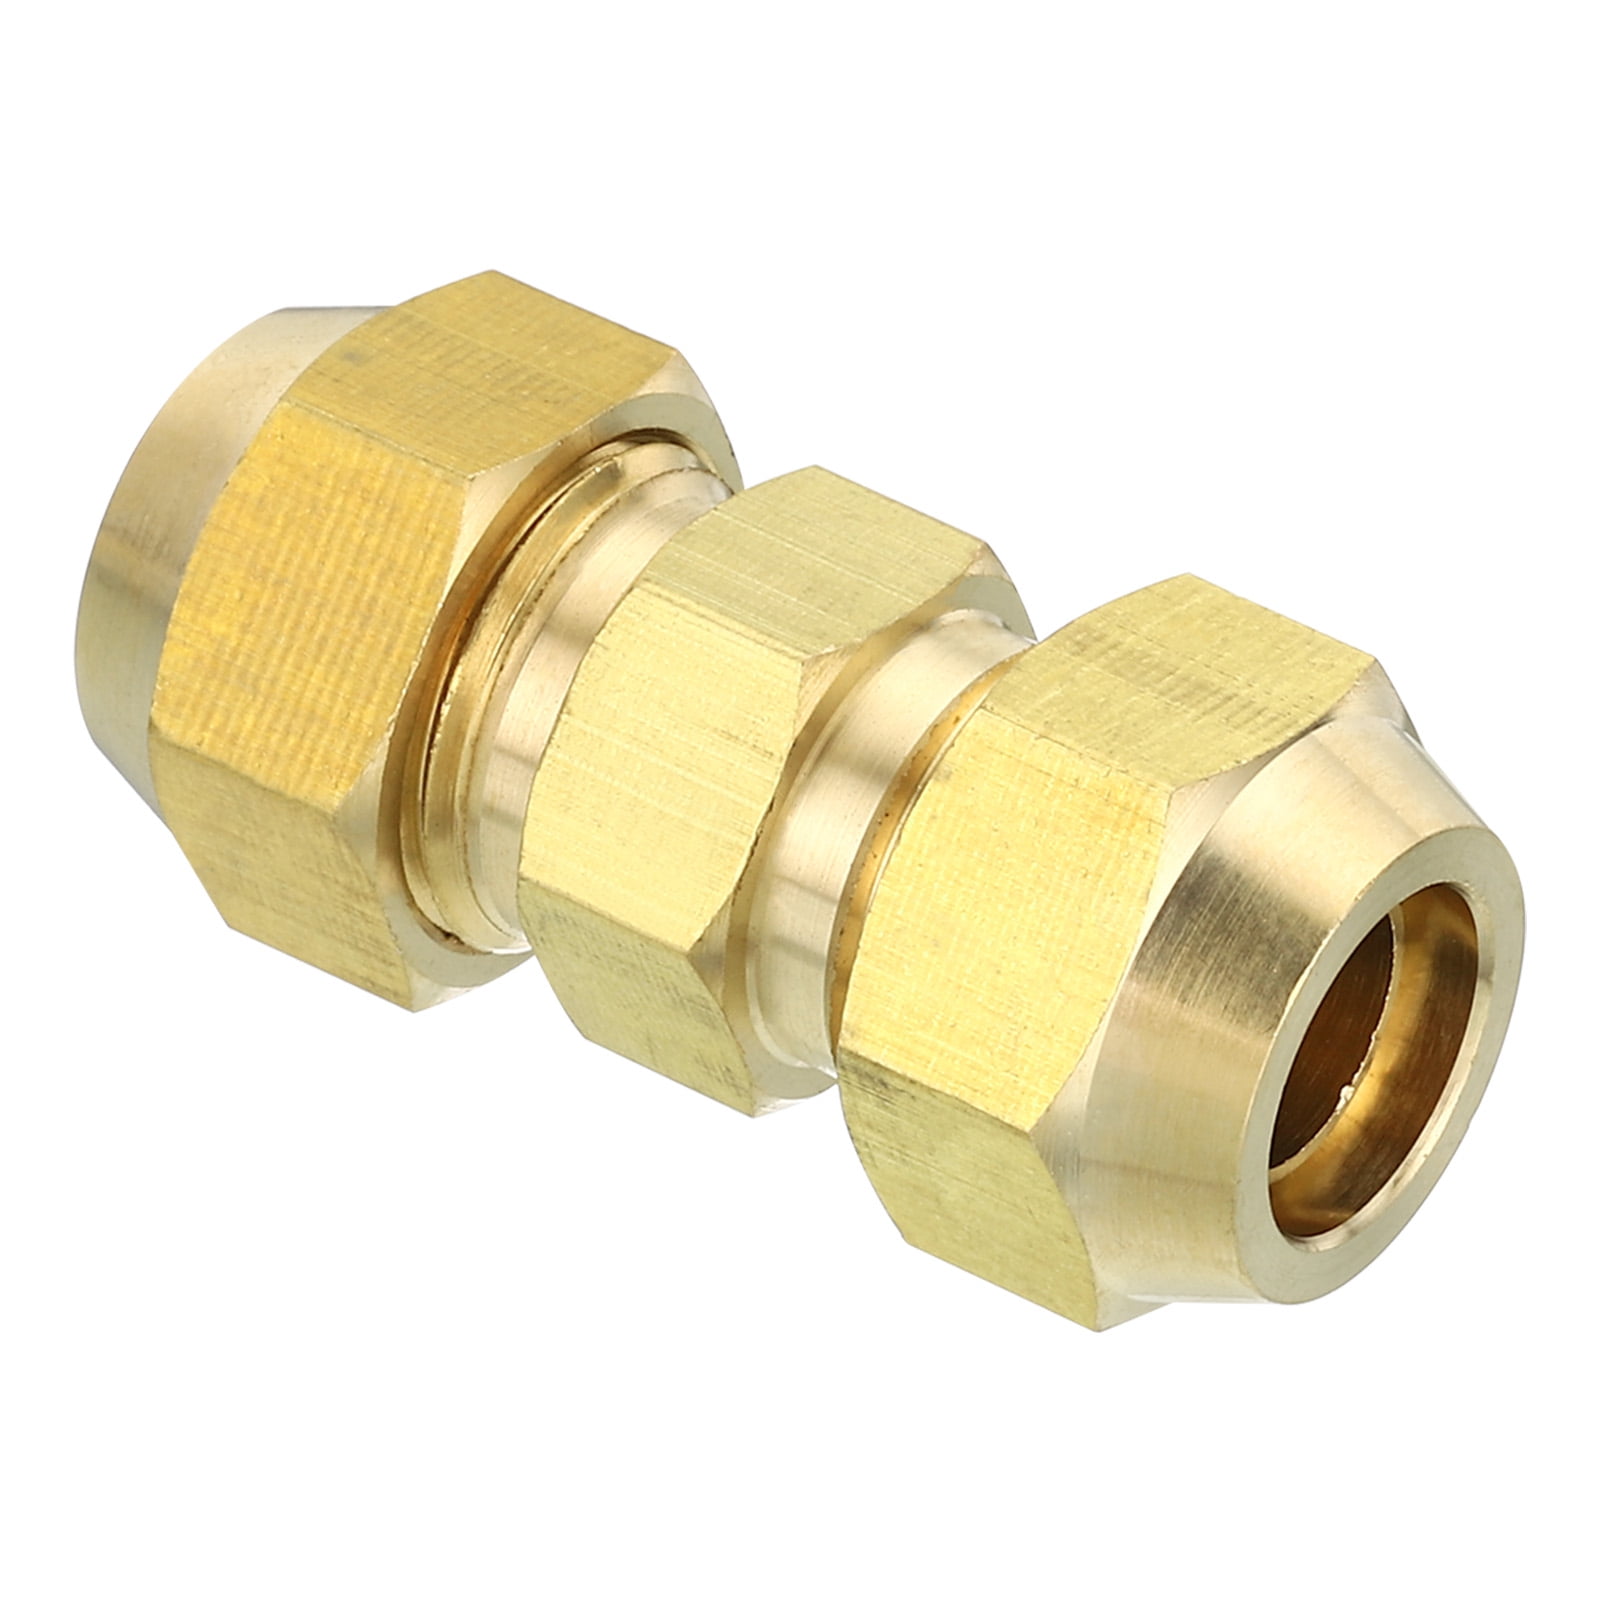 Uxcell 3/4 OD Brass Flare Union Connector, 1 Set Copper Double Pipe  Extension Fitting with Nut, 1.85x1.06 